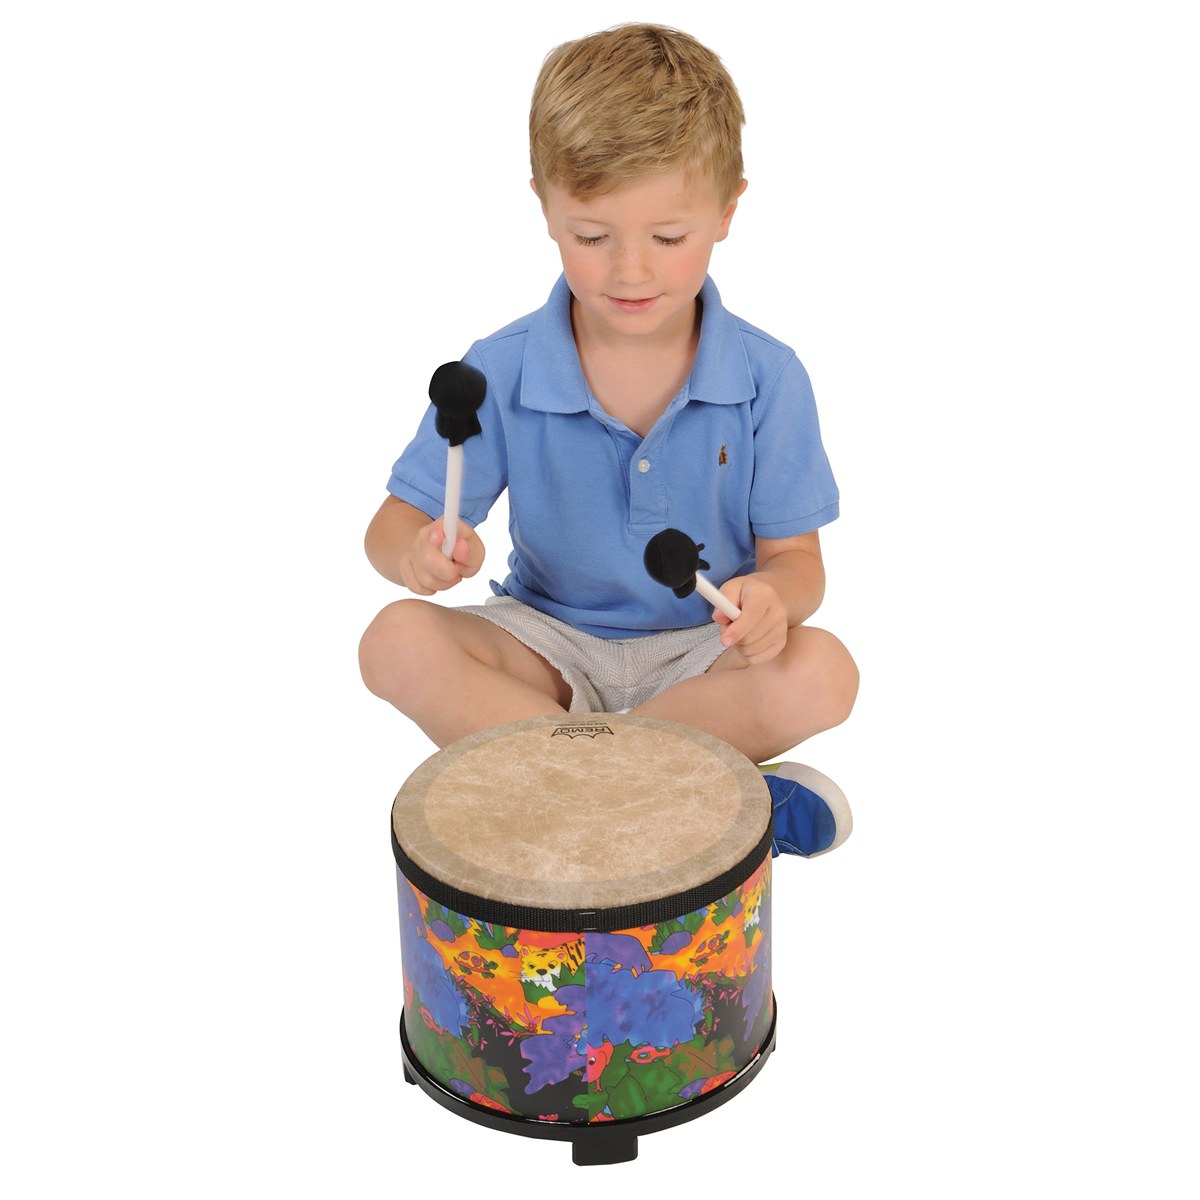 Remo Kids Percussion® Floor Tom Drum Comfort Sound Technology® Rain Forest, 10" - image 3 of 3